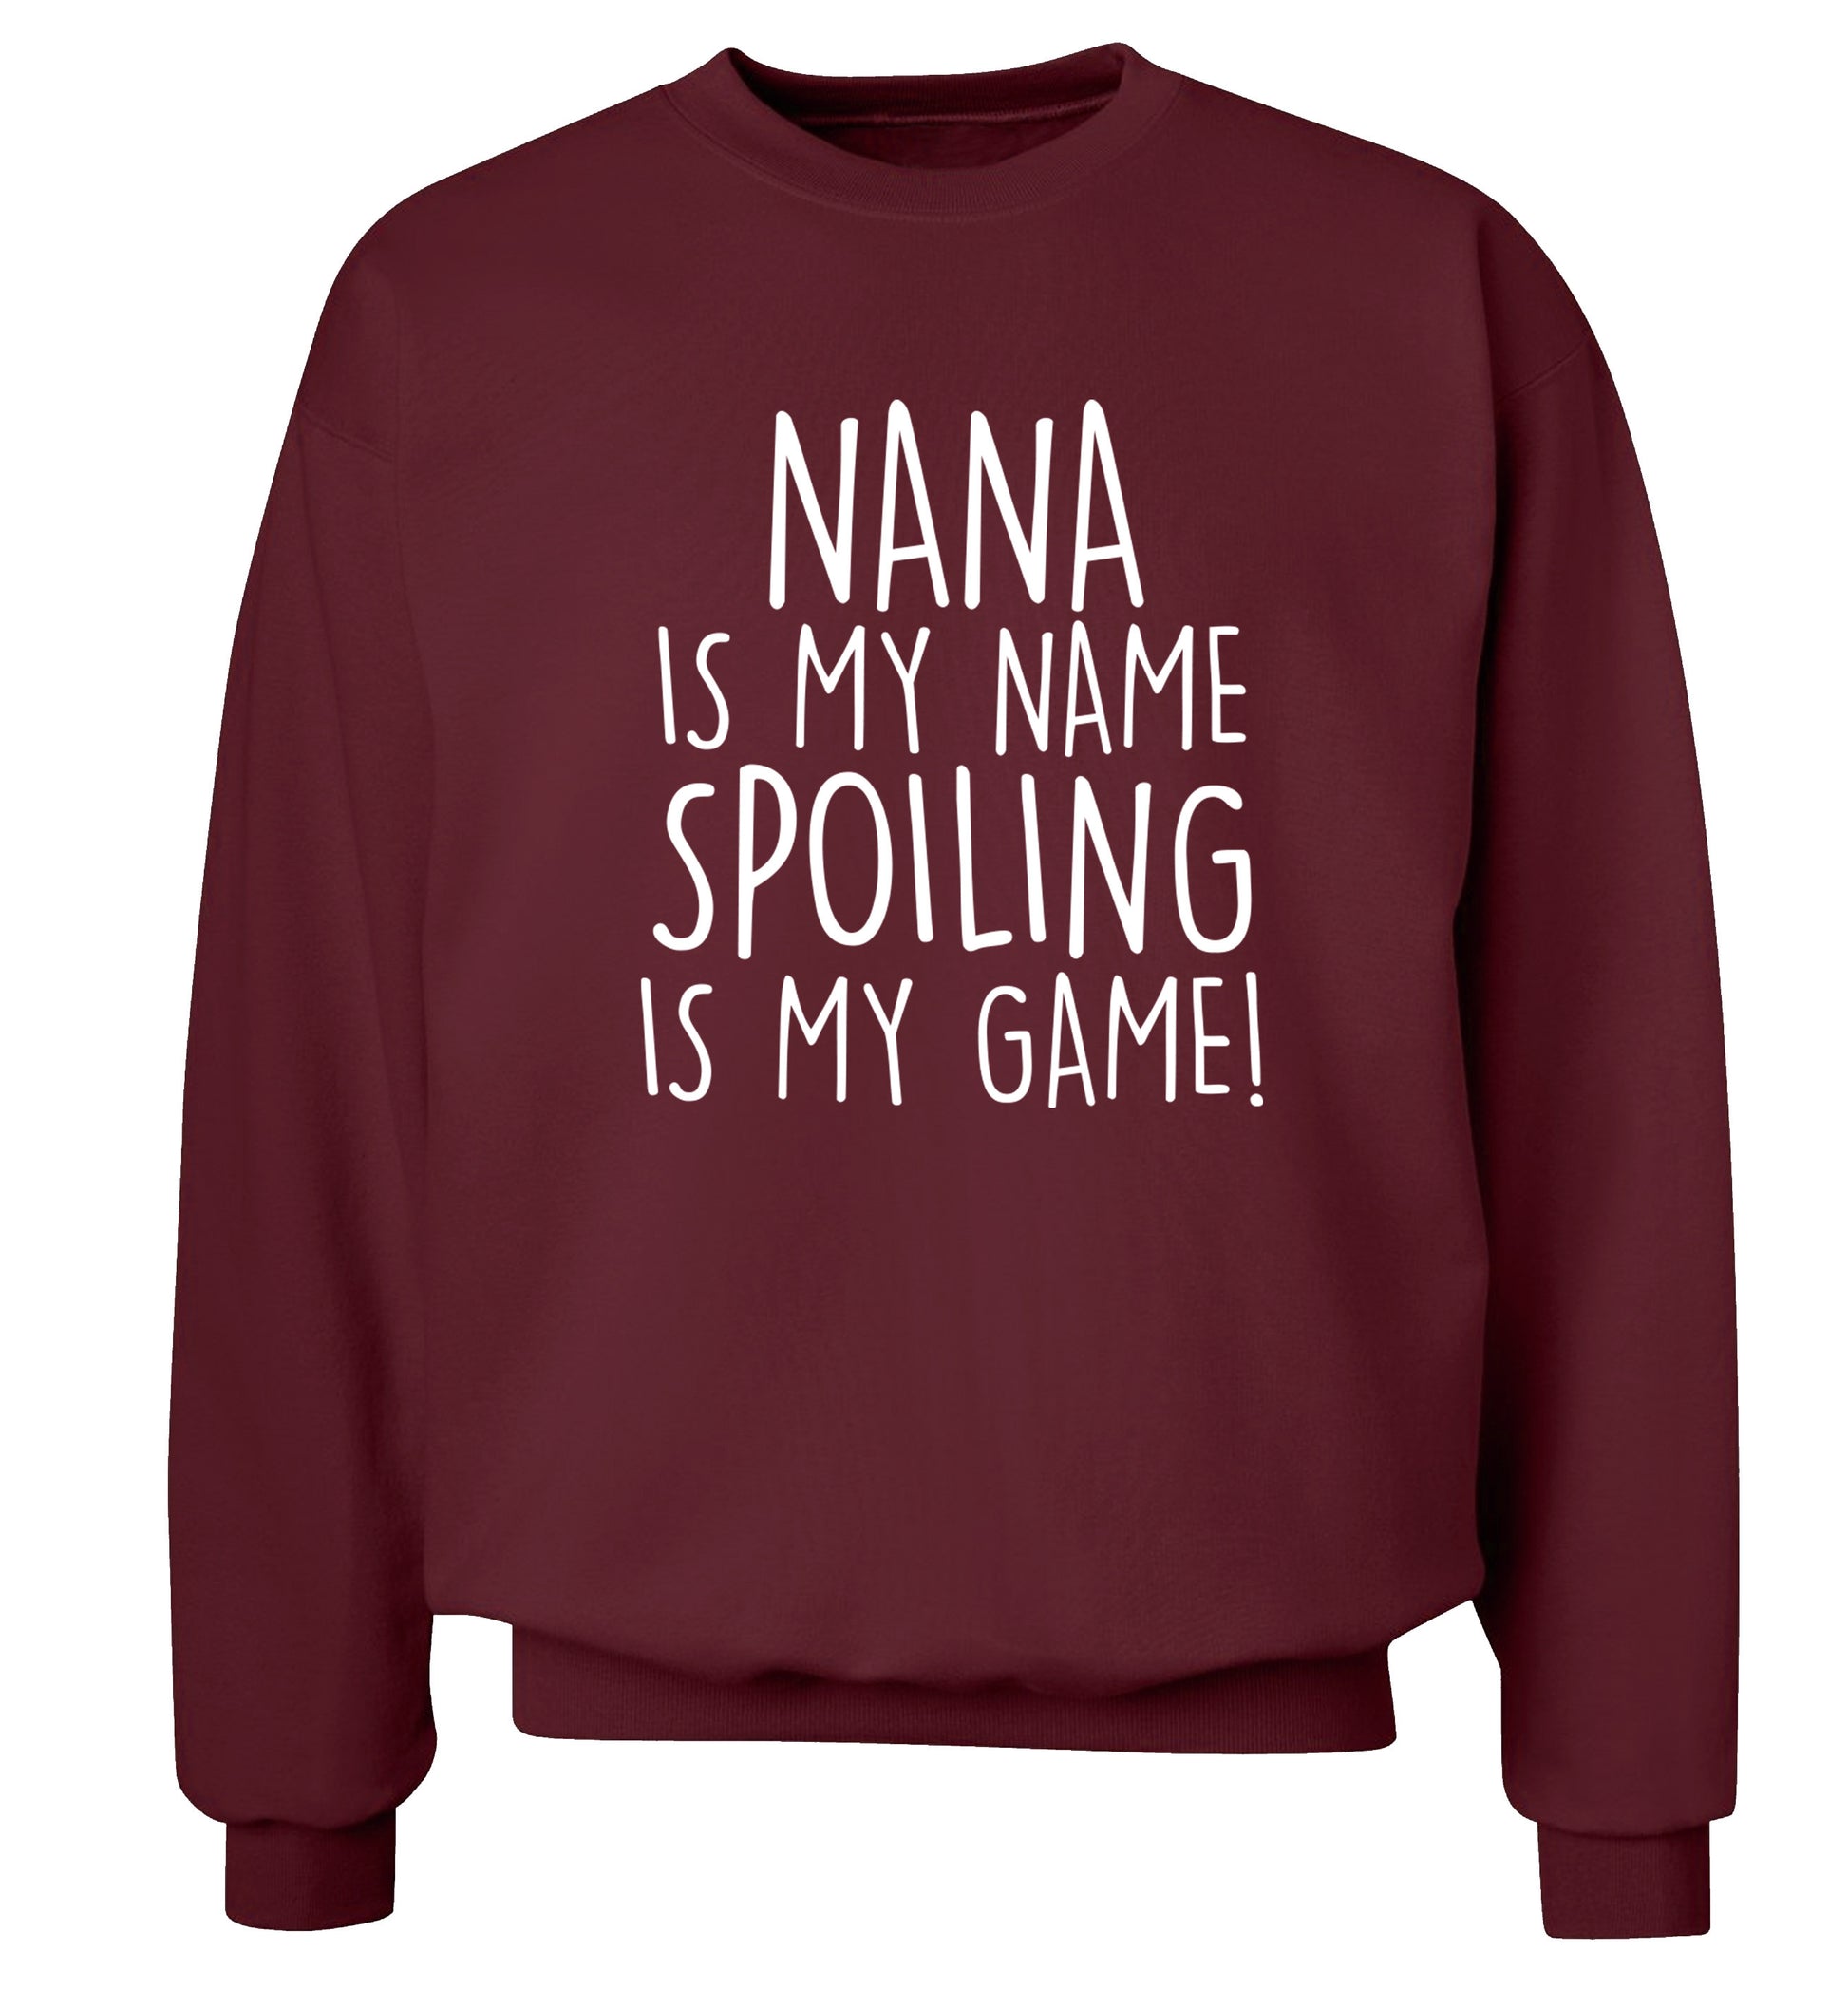 Nana is my name, spoiling is my game Adult's unisex maroon Sweater 2XL